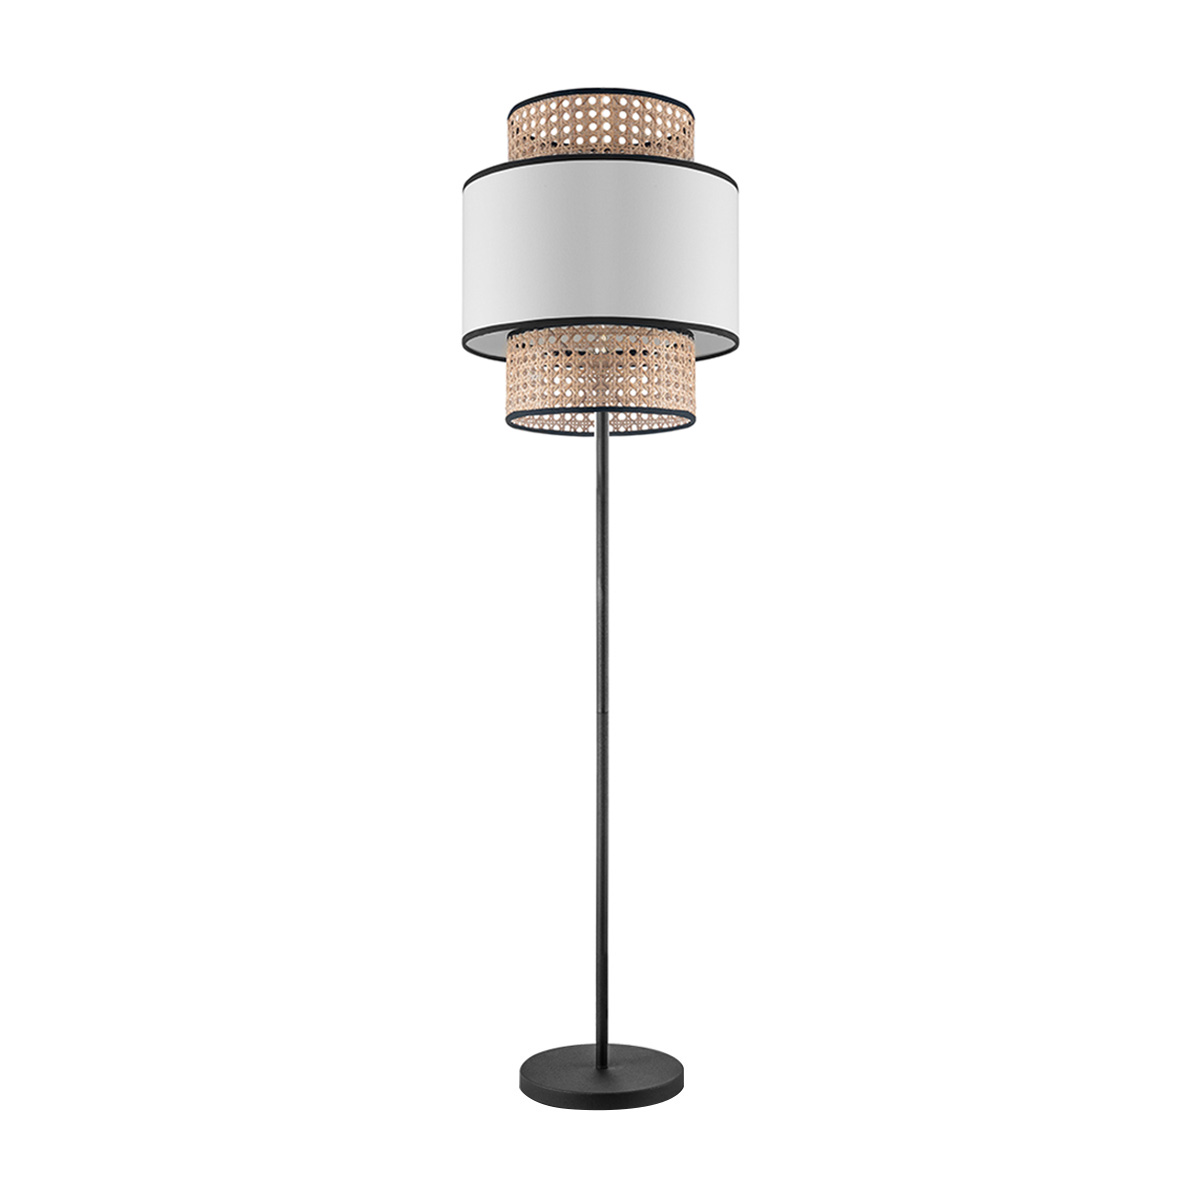 Tangla lighting - TLF7014-30WT - LED floor lamp 1 Light - metal and natural rattan and TC fabric in natural and white - night - E27